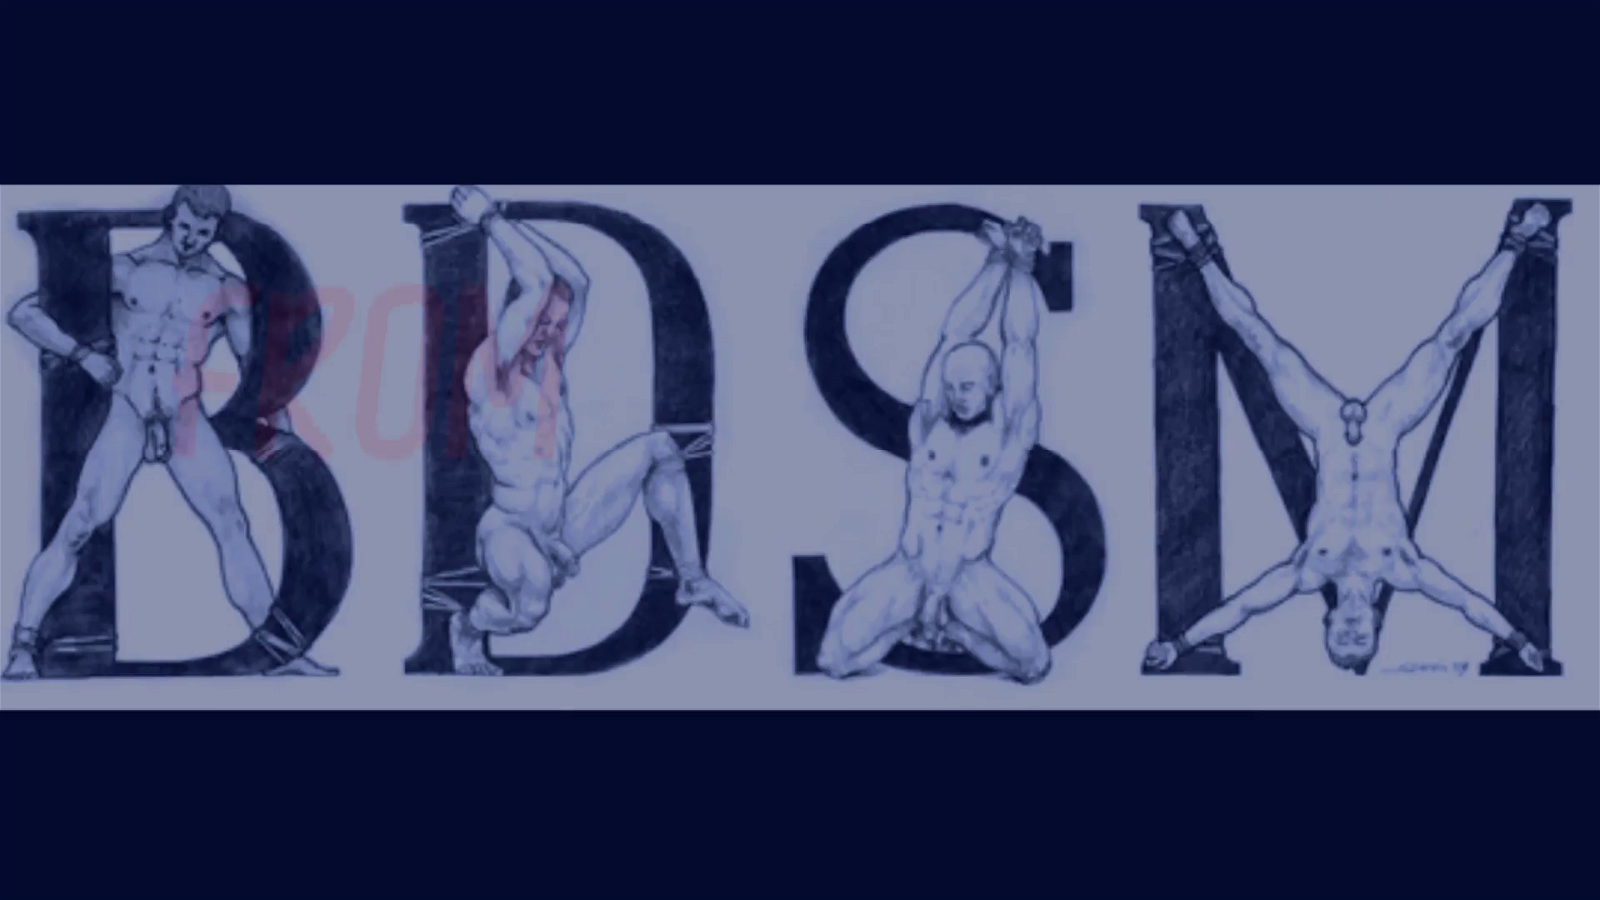 Watch the Video by Deetz Mac Innes with the username @Deetz, posted on April 6, 2020. The post is about the topic Bisexual male. and the text says '#BiBoysDoExist during the #pandemic!  Wondering what the renown #Welsh family, #TheGlamorganProgeny, do to keep busy when all the #aliens & #mysteries are #underquarantine? Visit  each #Mon for the latest #polyerotic & #mmromance chapter'